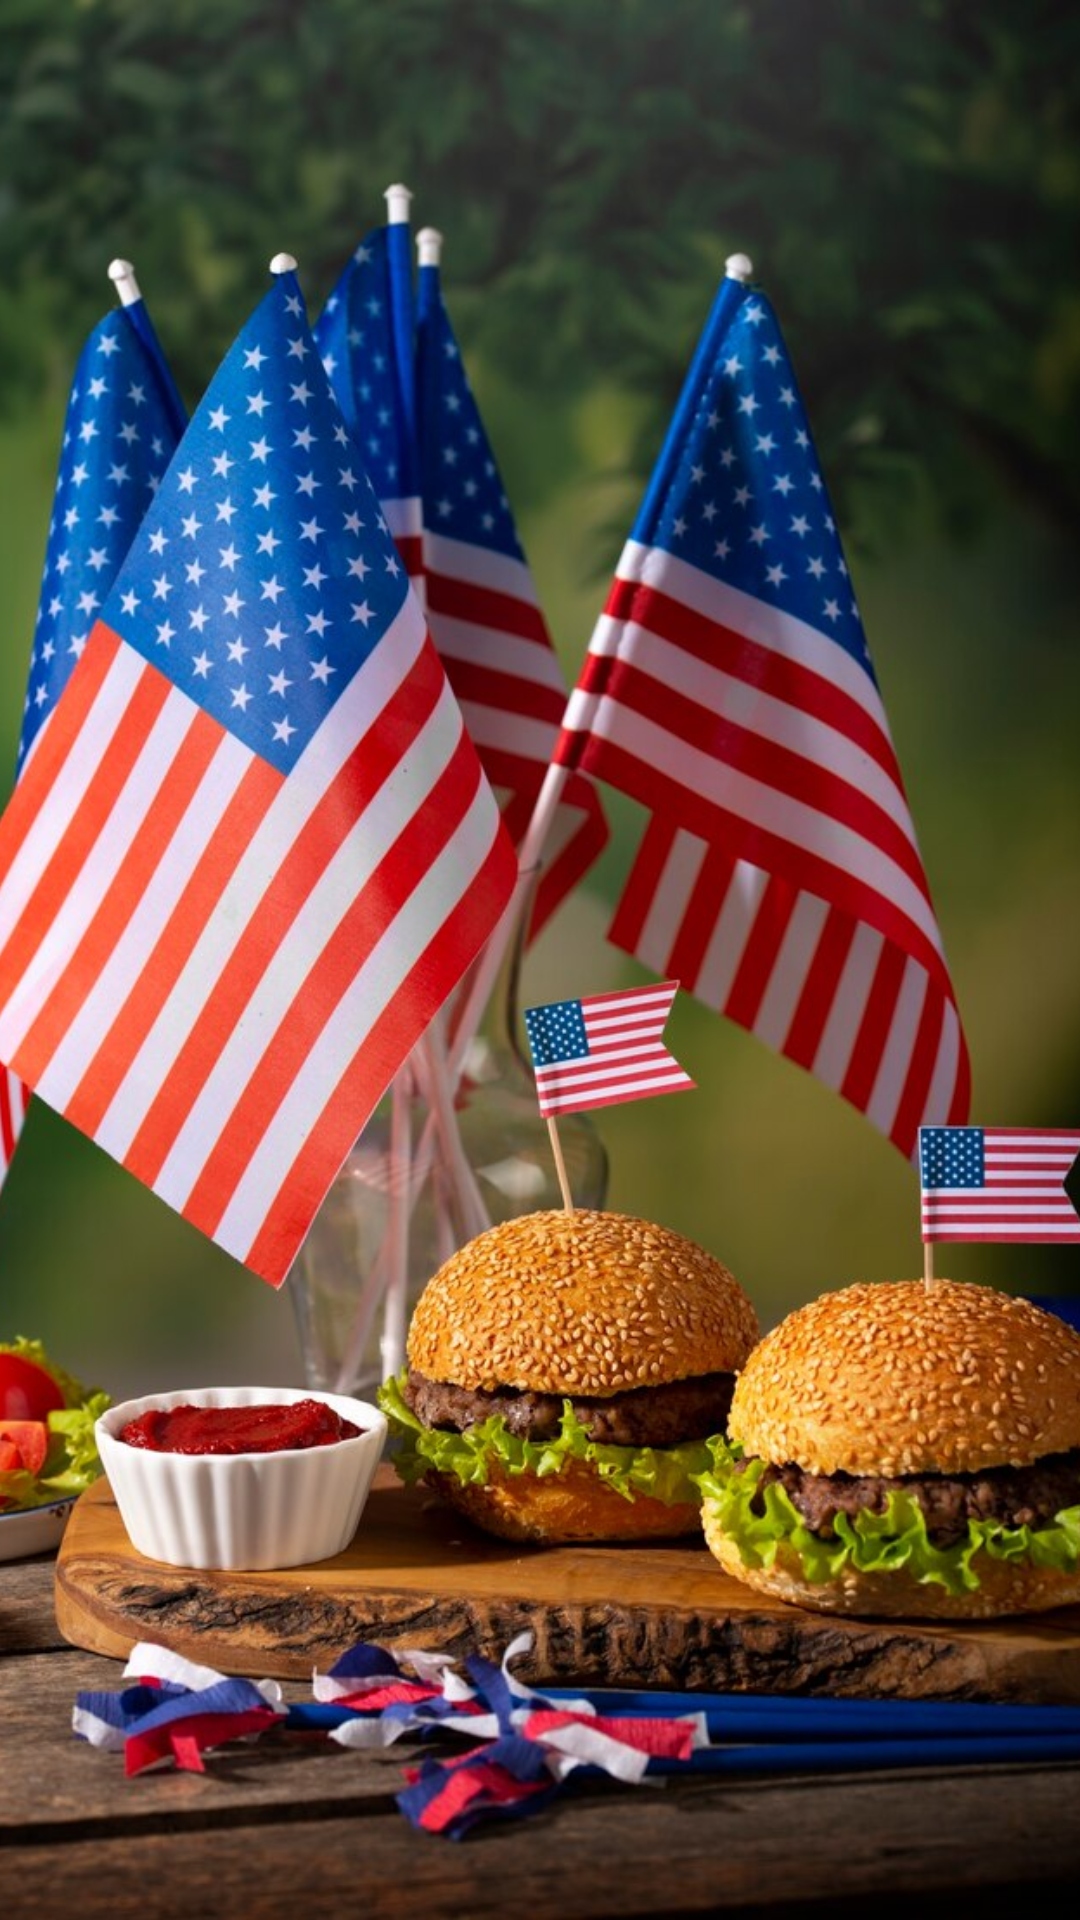 7 American dishes perfect for celebrating US Independence Day